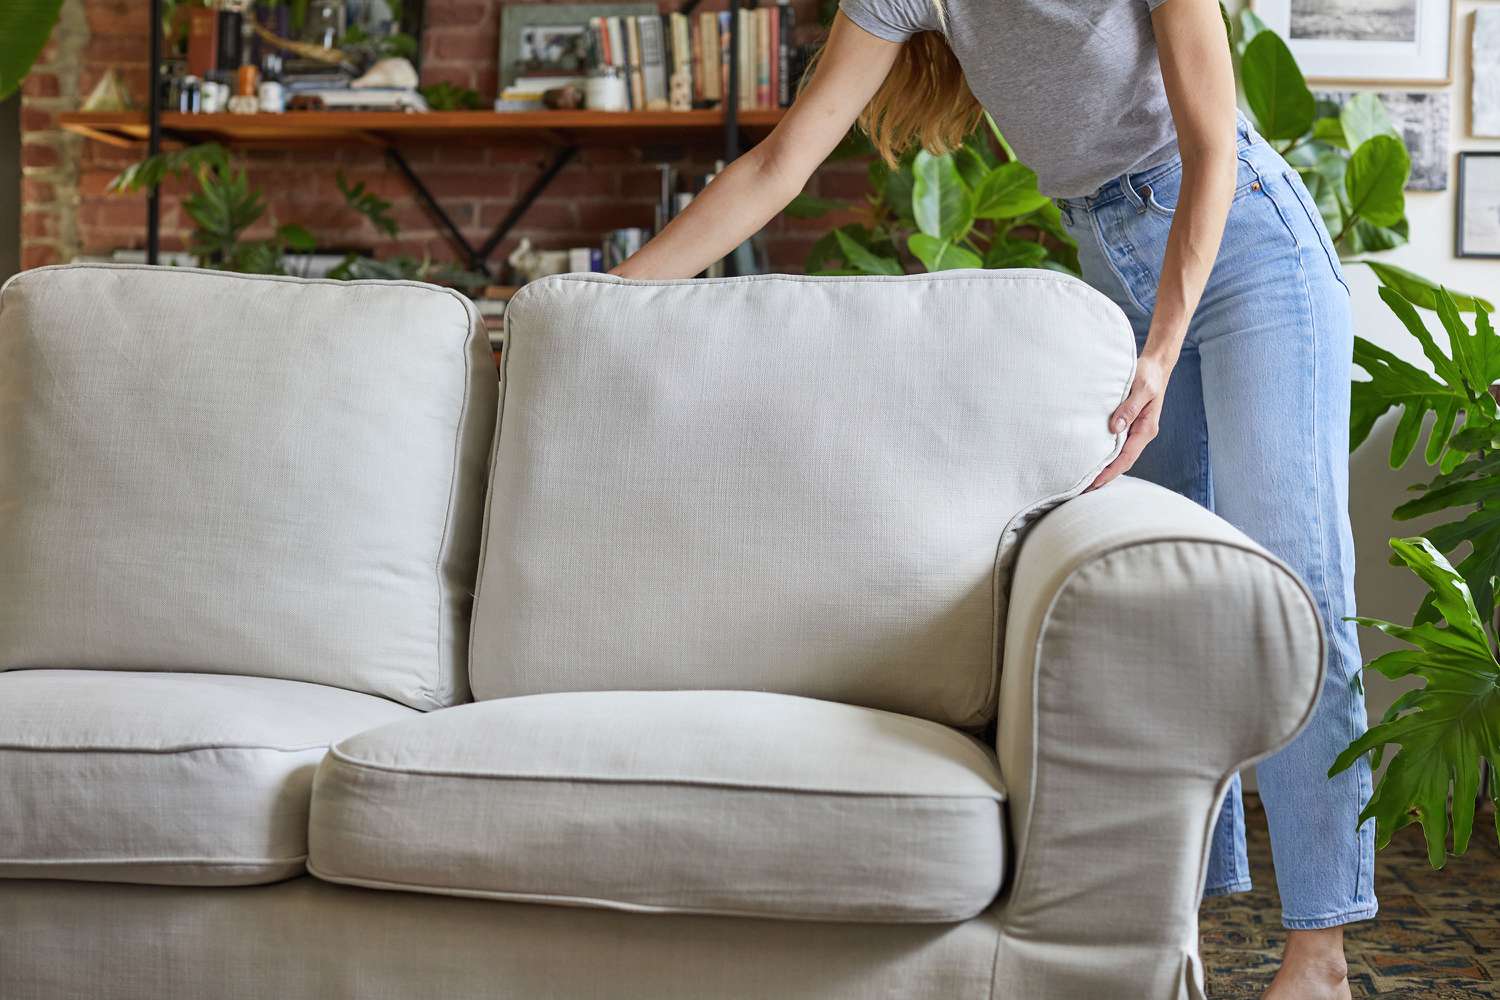 How To Fix Cushions On Couch